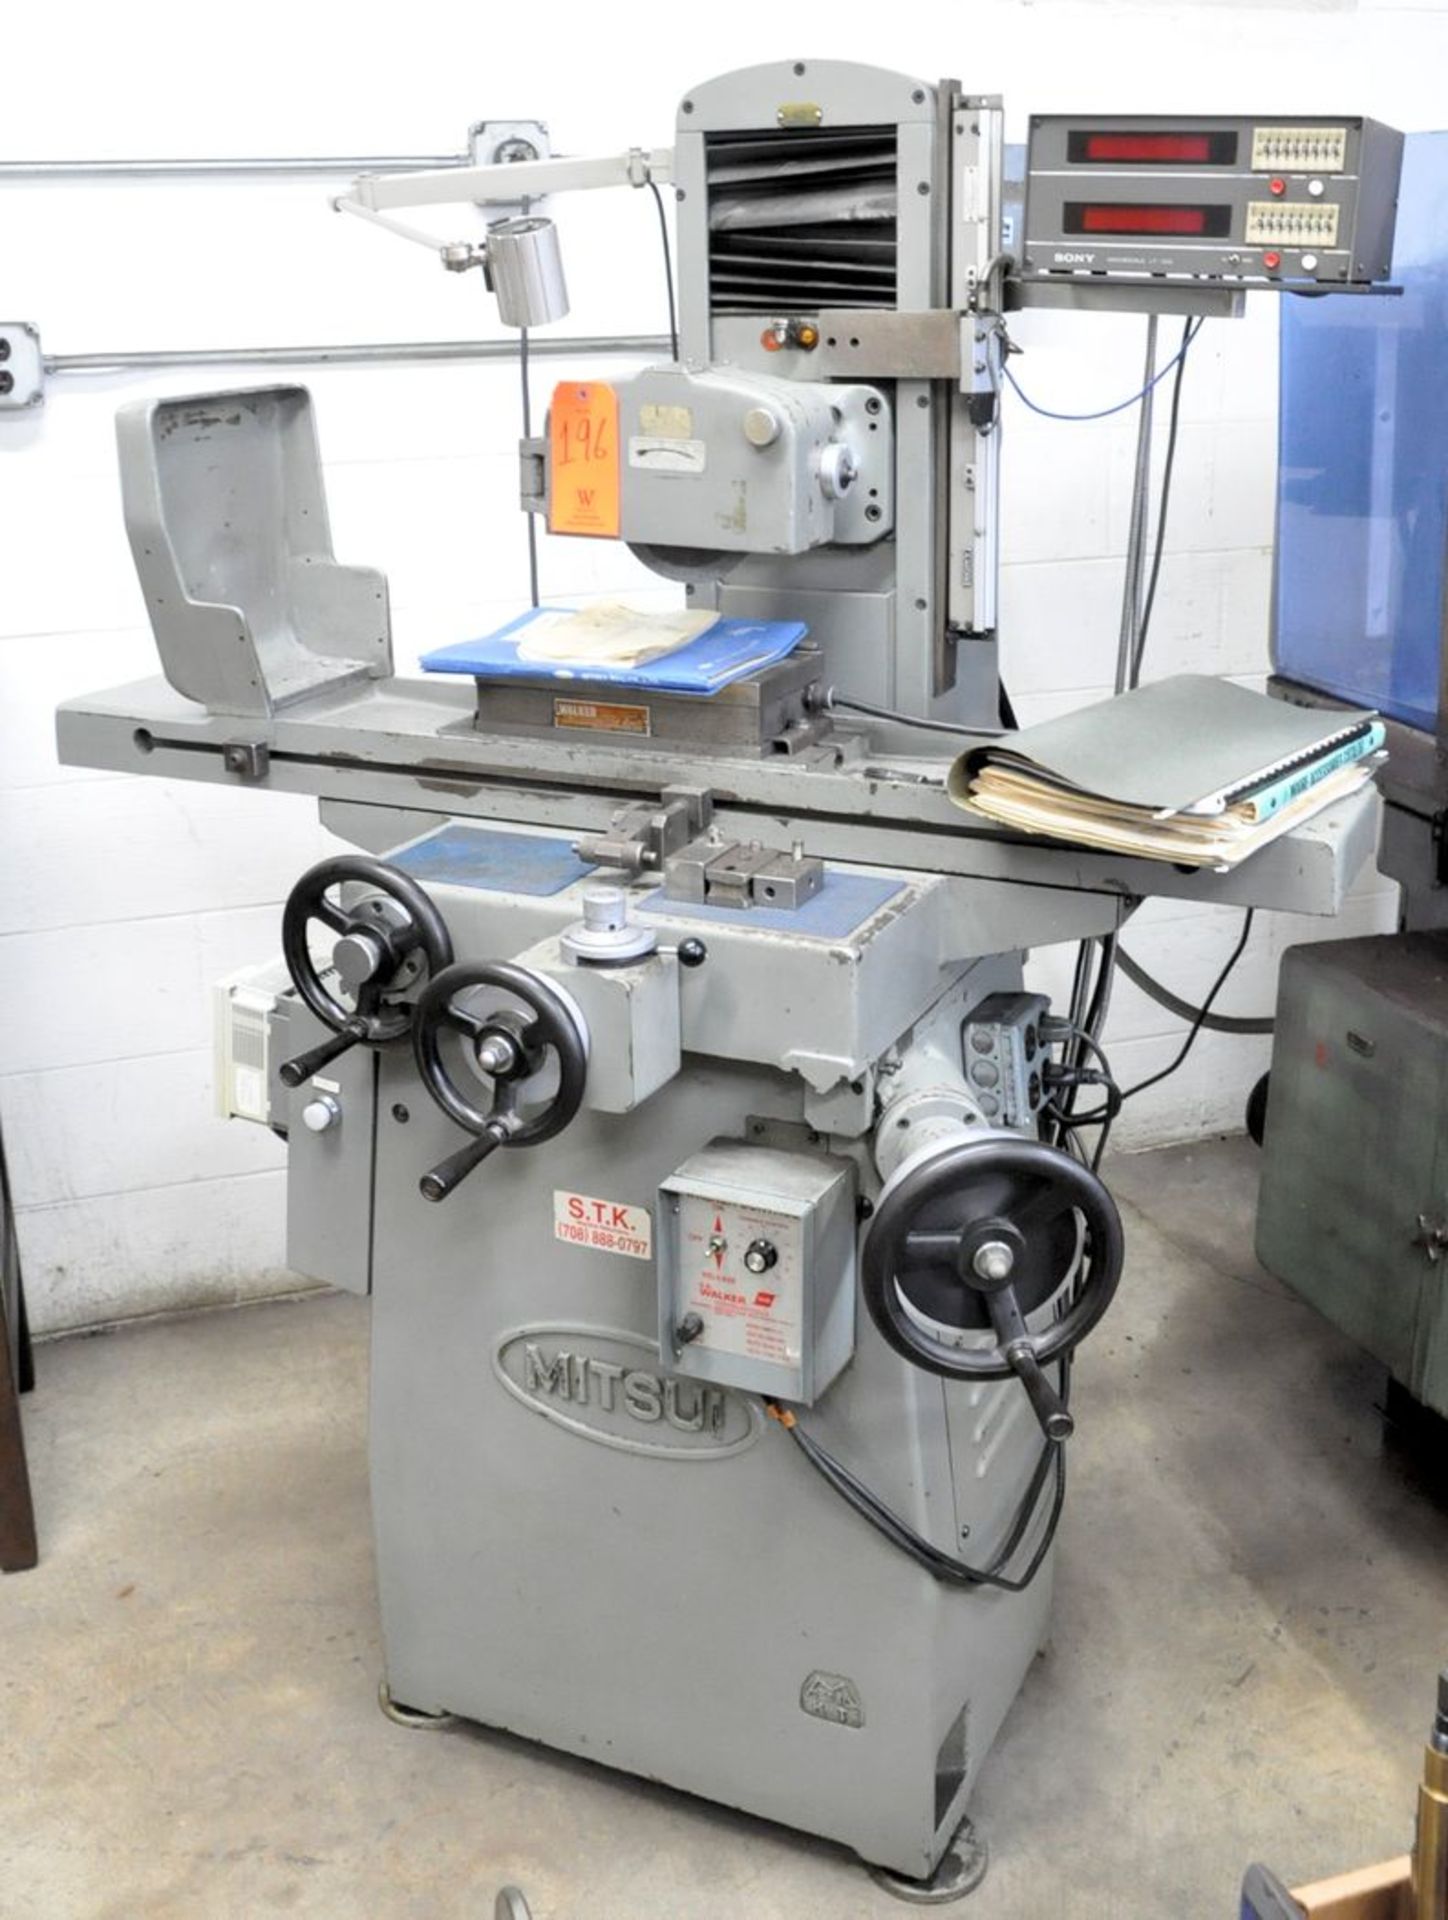 Mitsui Model 200MDX 6" X 12" Hand Feed Surface Grinder, Sony Magnascale LF200 2-Axis Digital